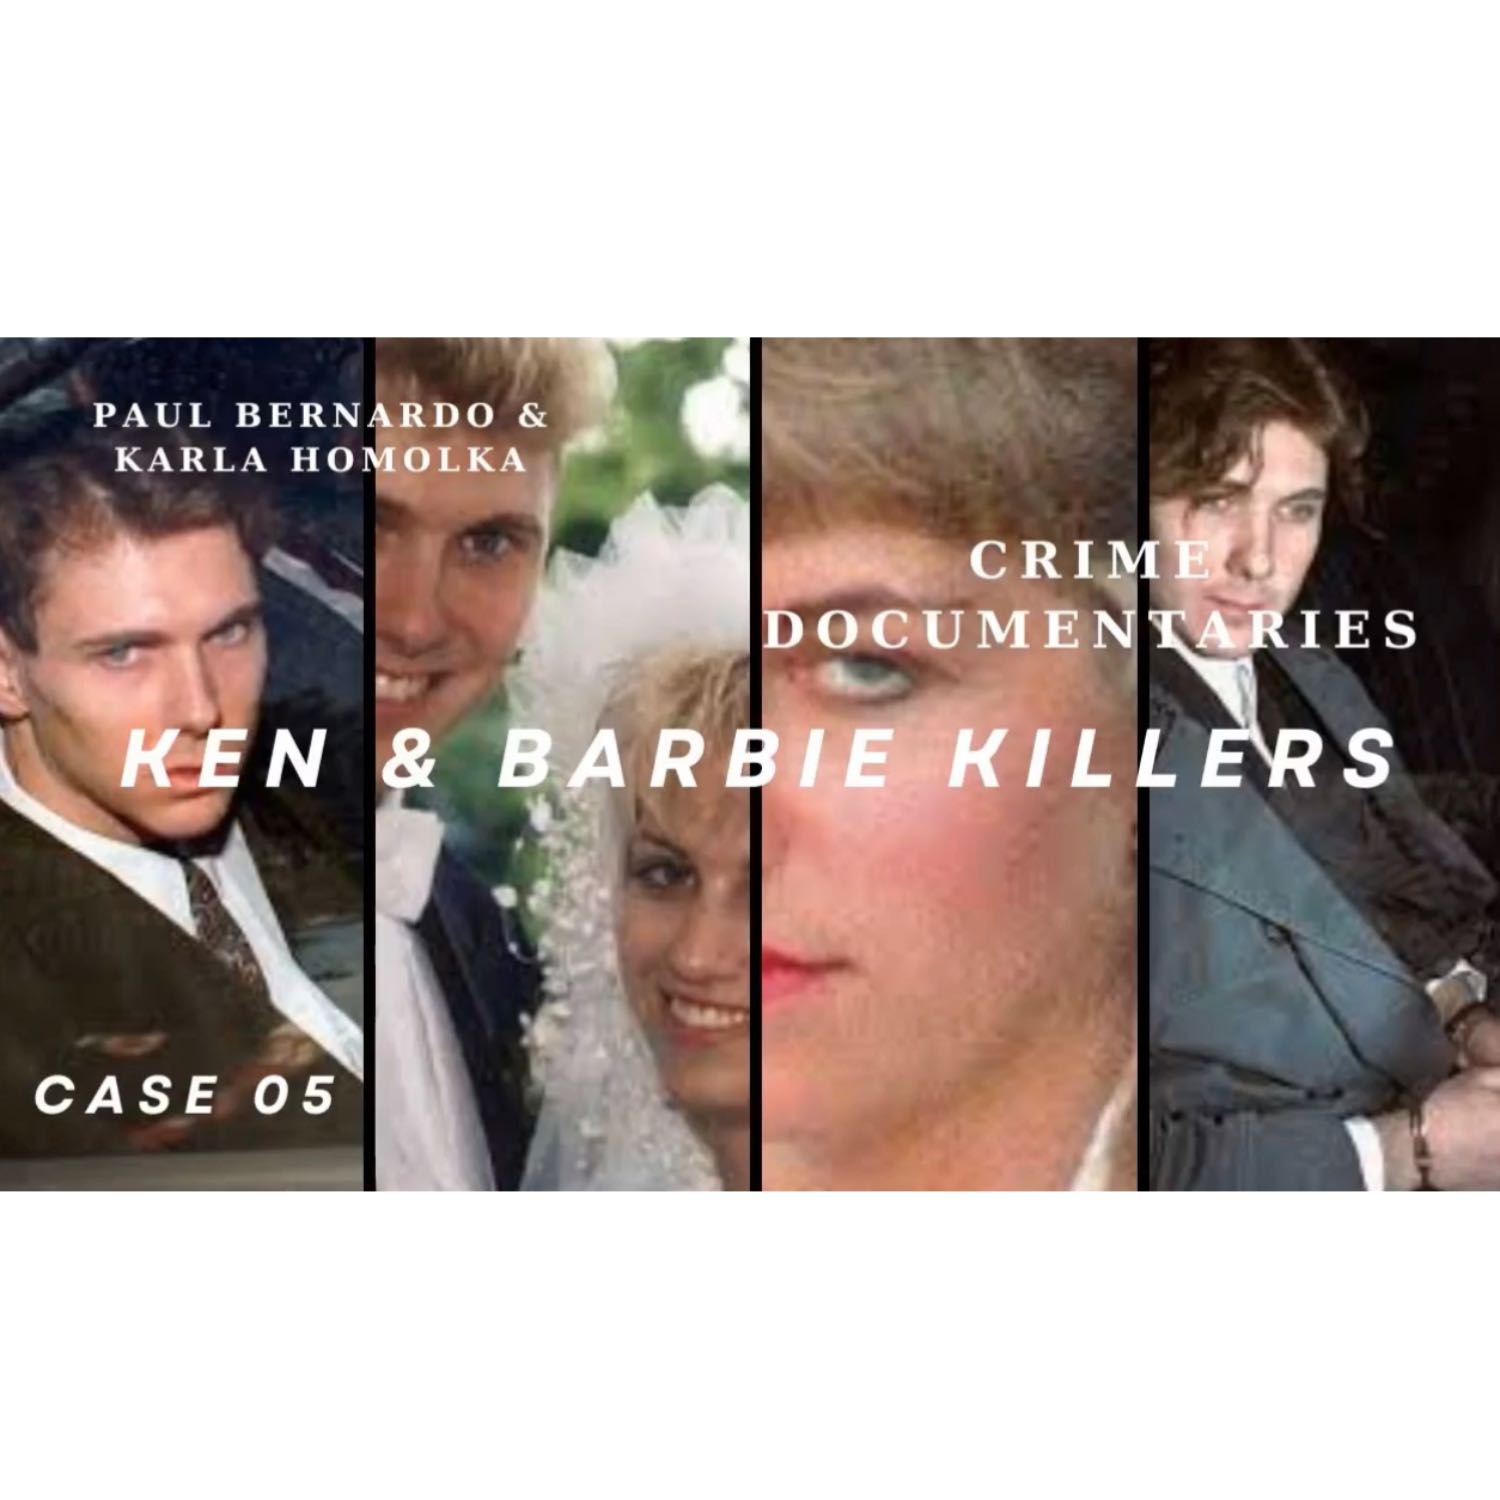 Case 005: The Ken And Barbie Killers